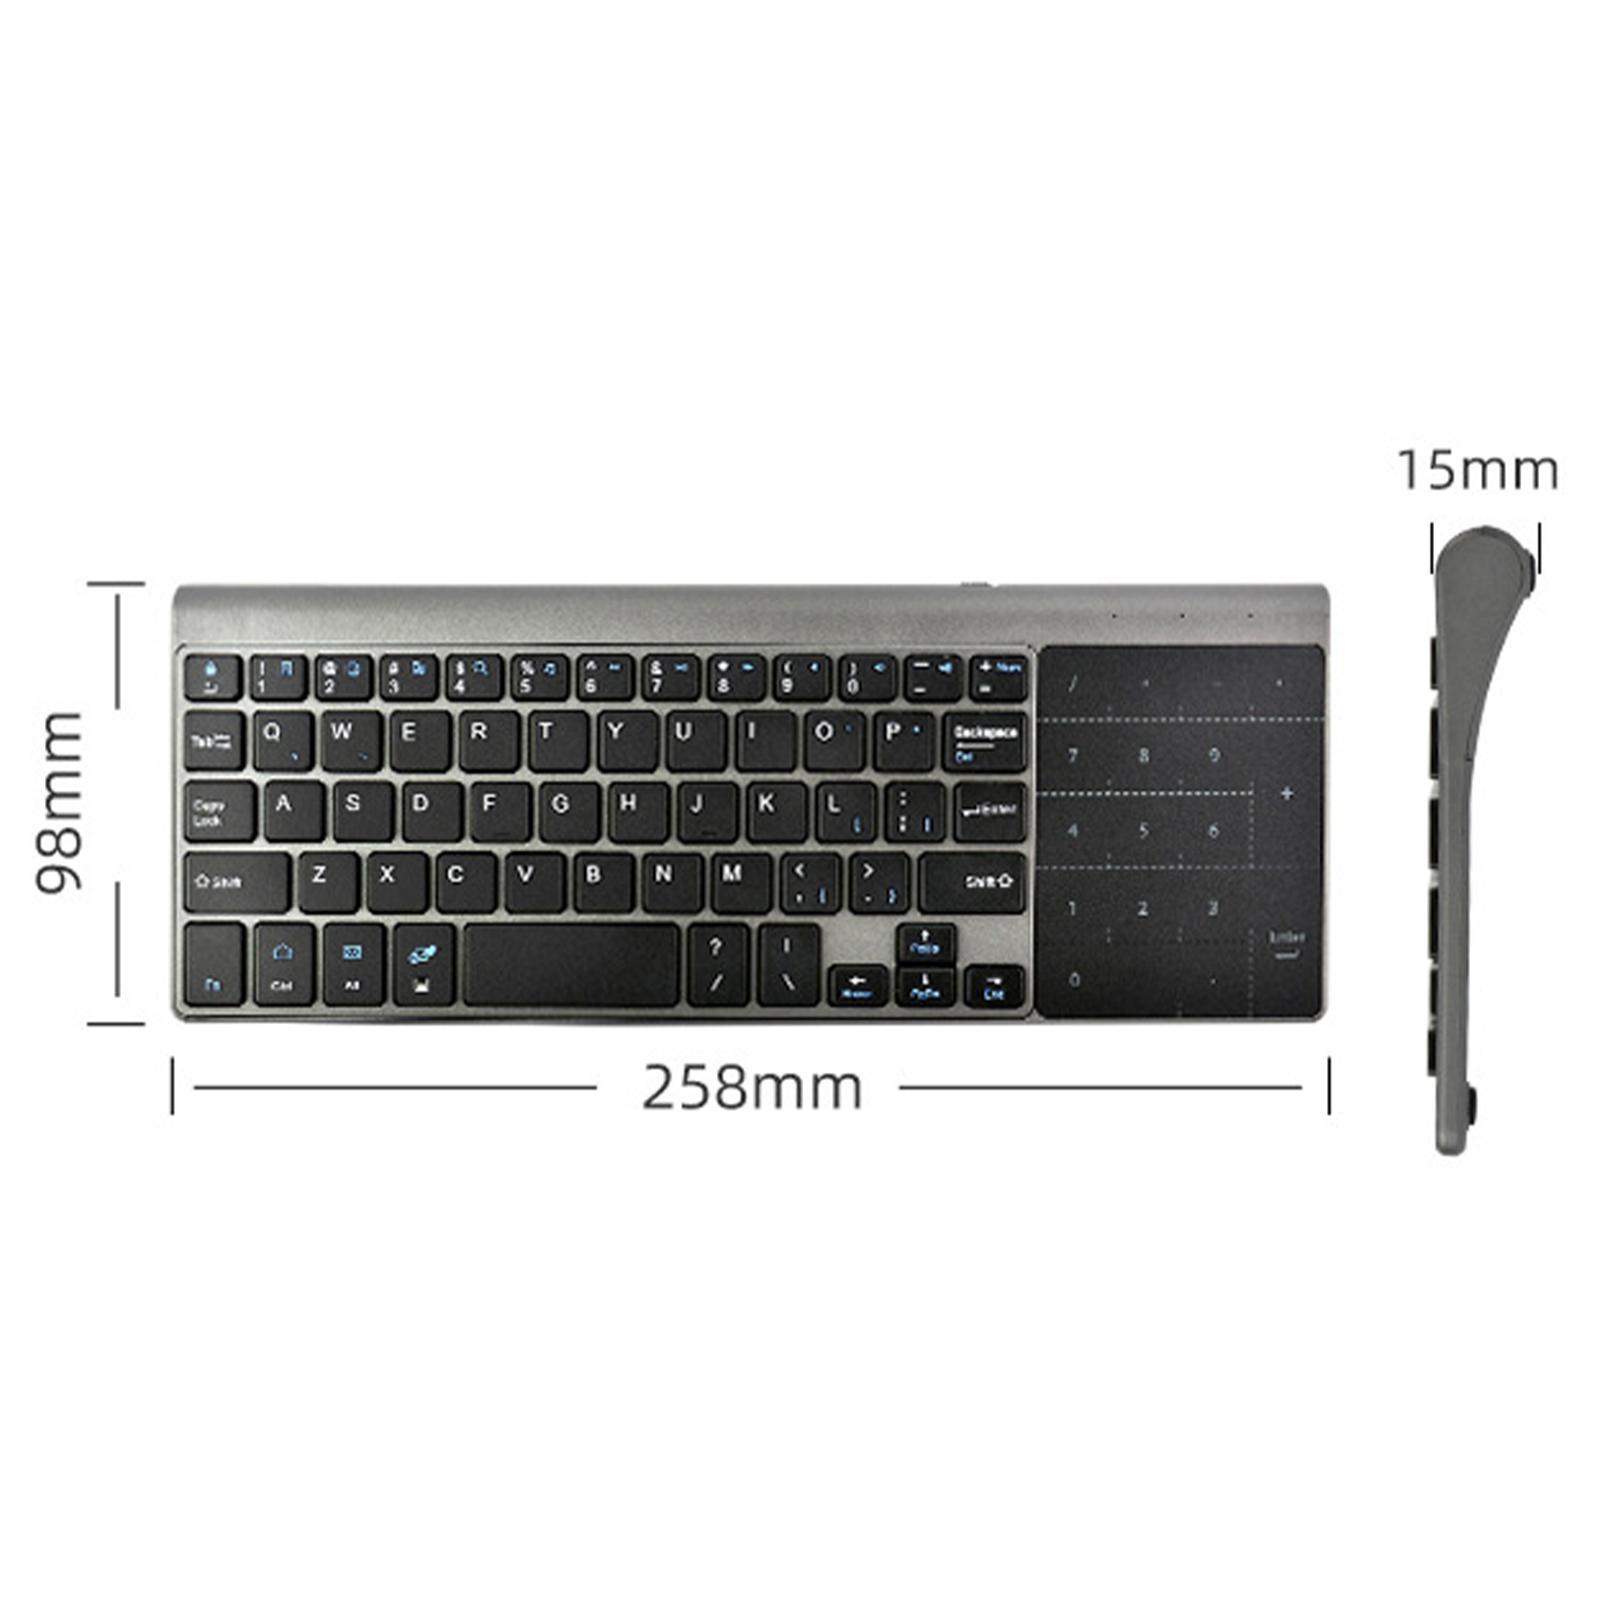 Mini Wireless Keyboard with USB Receiver for PC Computer Power Saving Slim